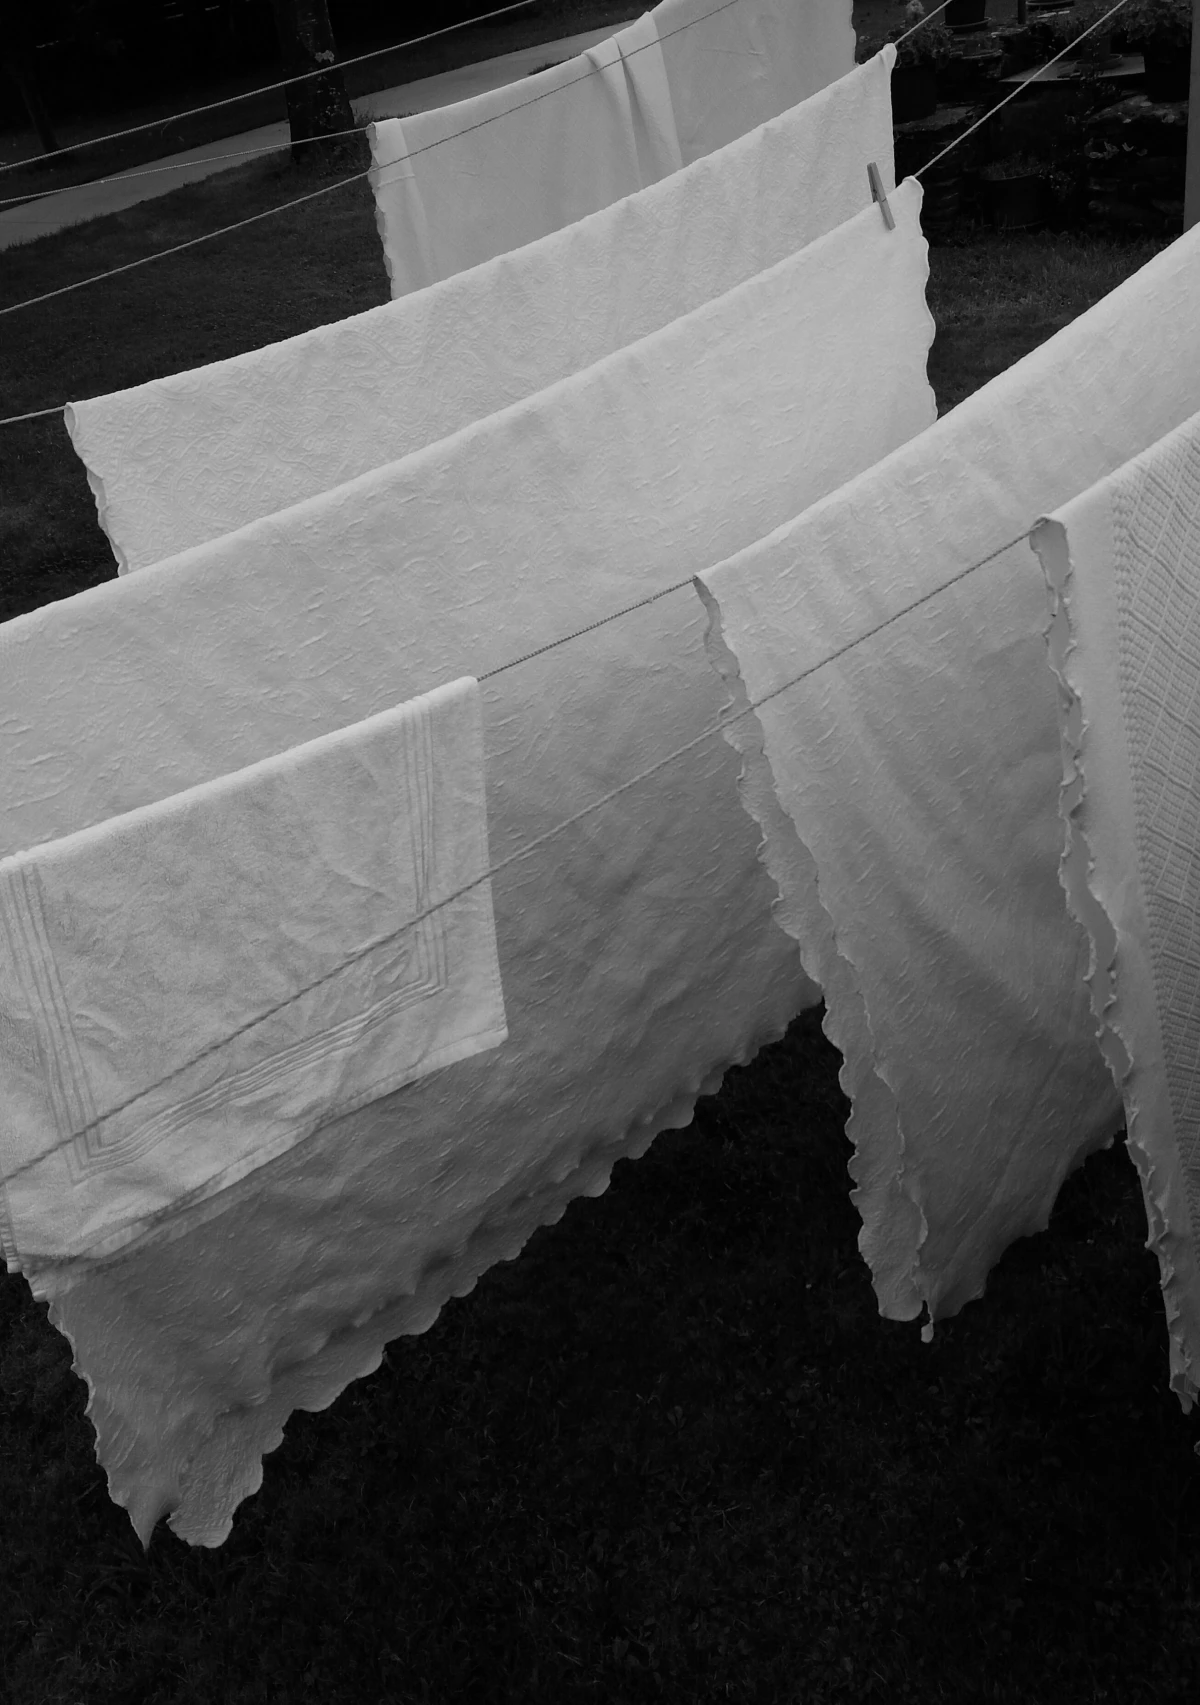 white linens on a drying rack